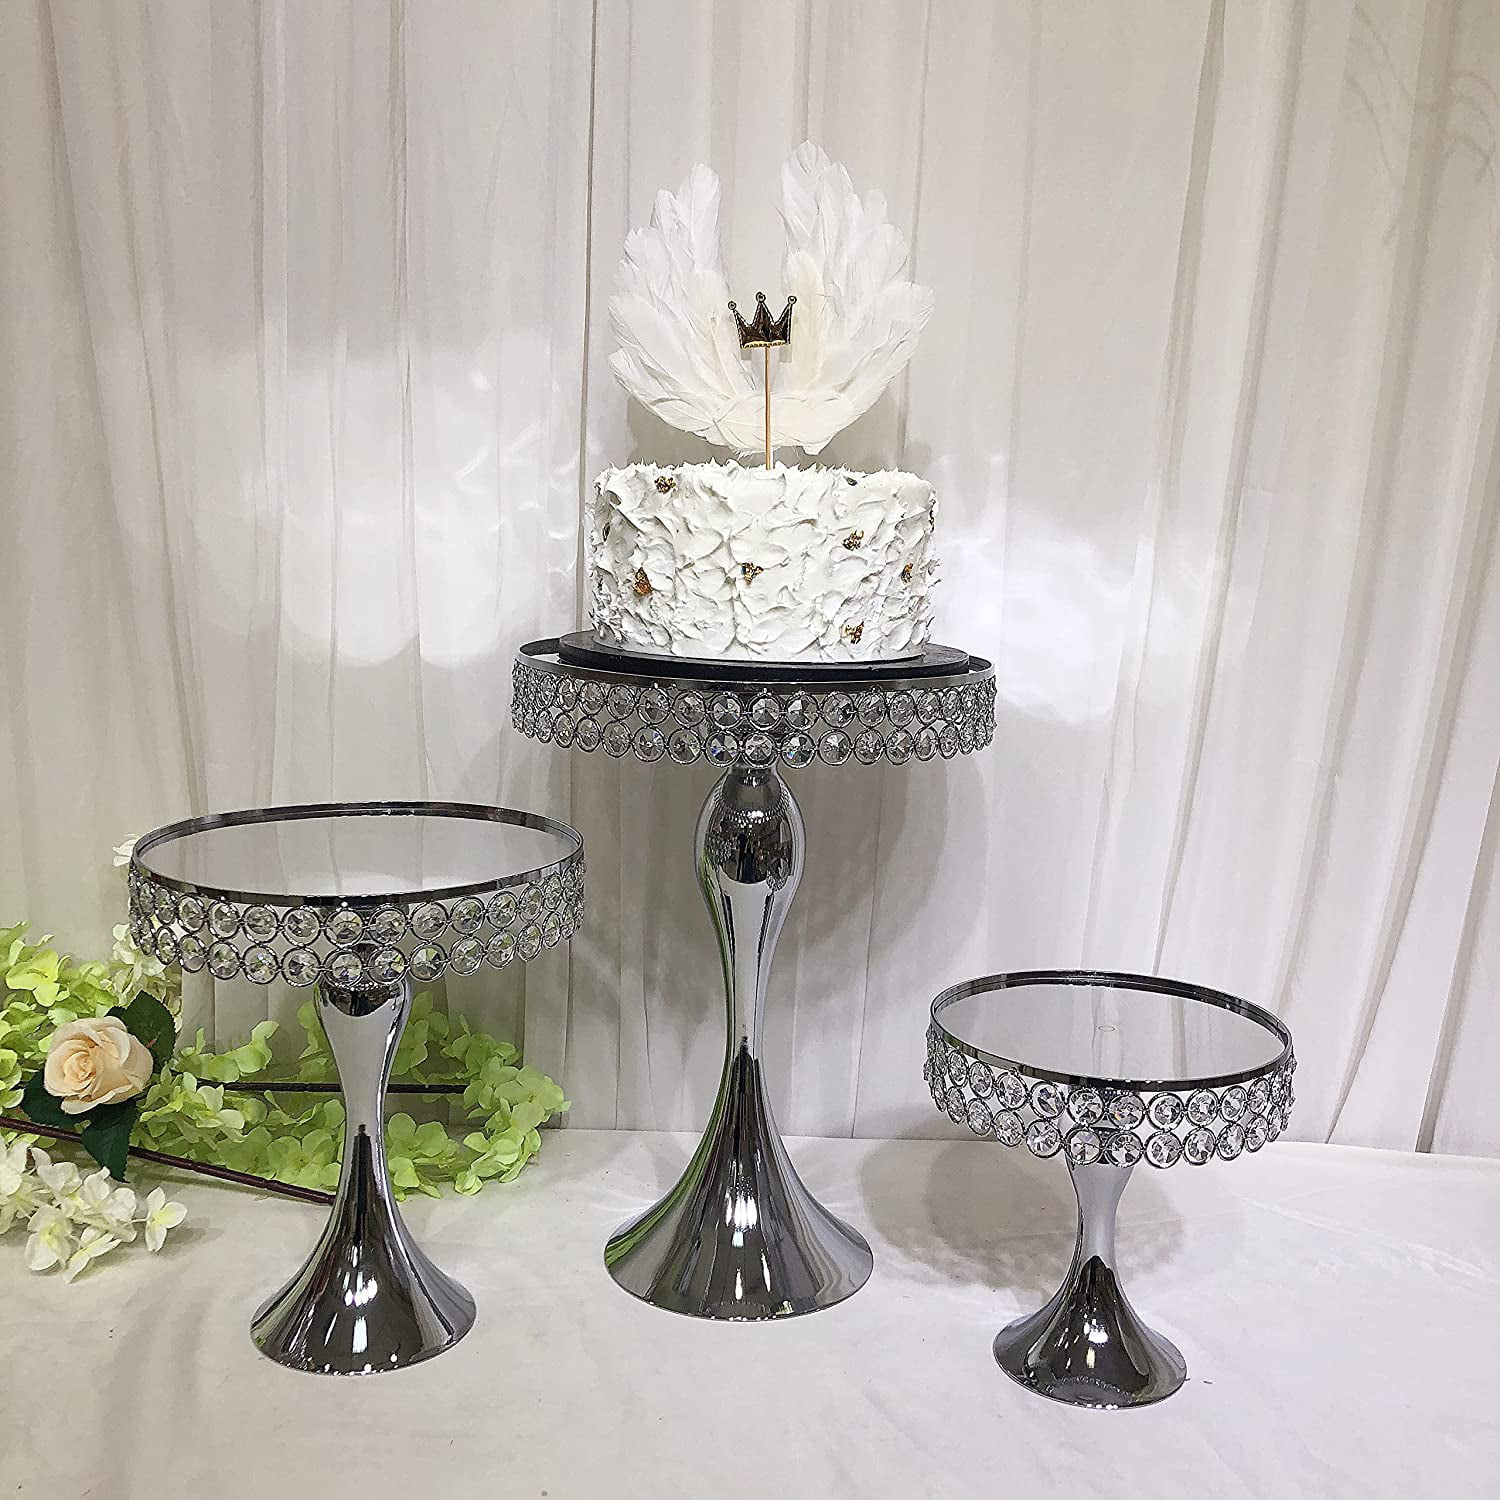 Details about   Bling Cake Stand Metal Crystal Dessert Cupcake Pastry Candy Display Plate Base 